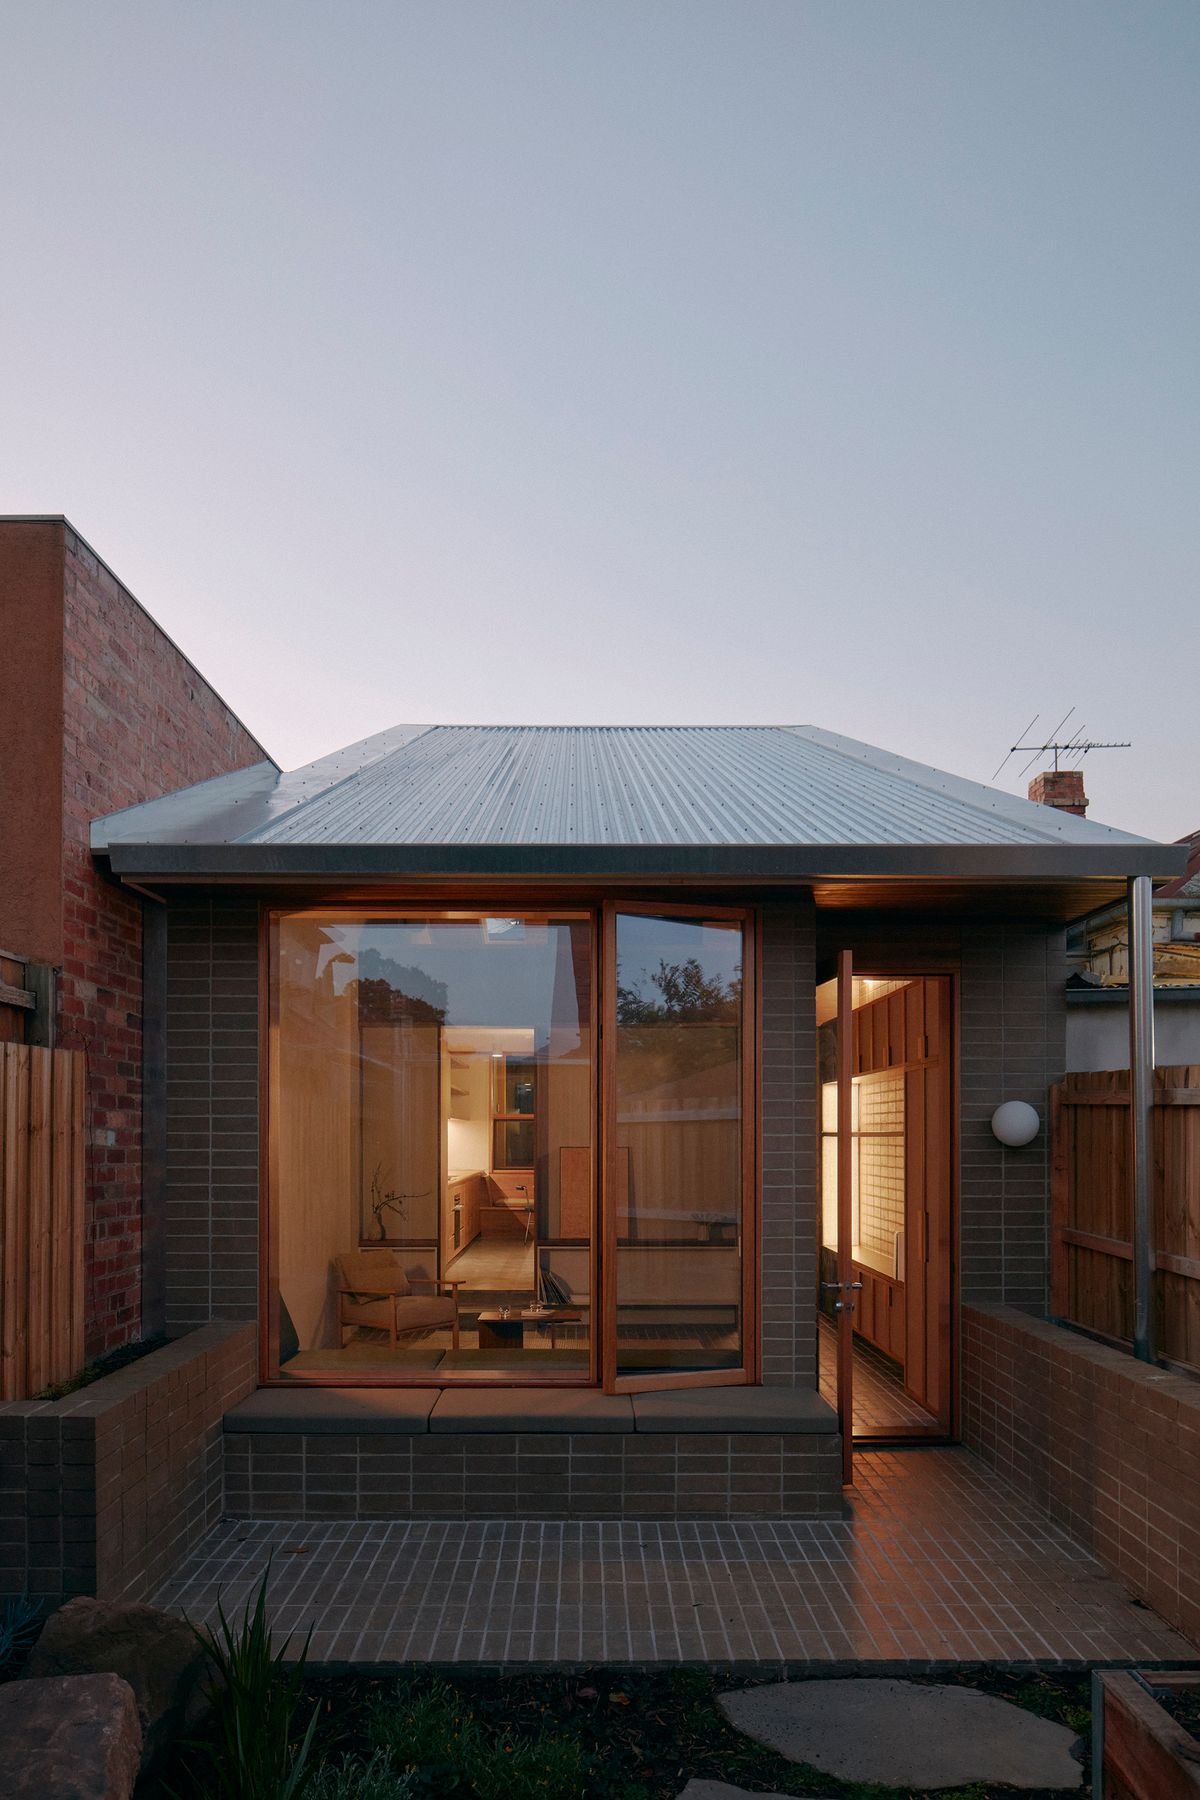 Brunswick by Placement Studio showing house at twilight with warm light in interior